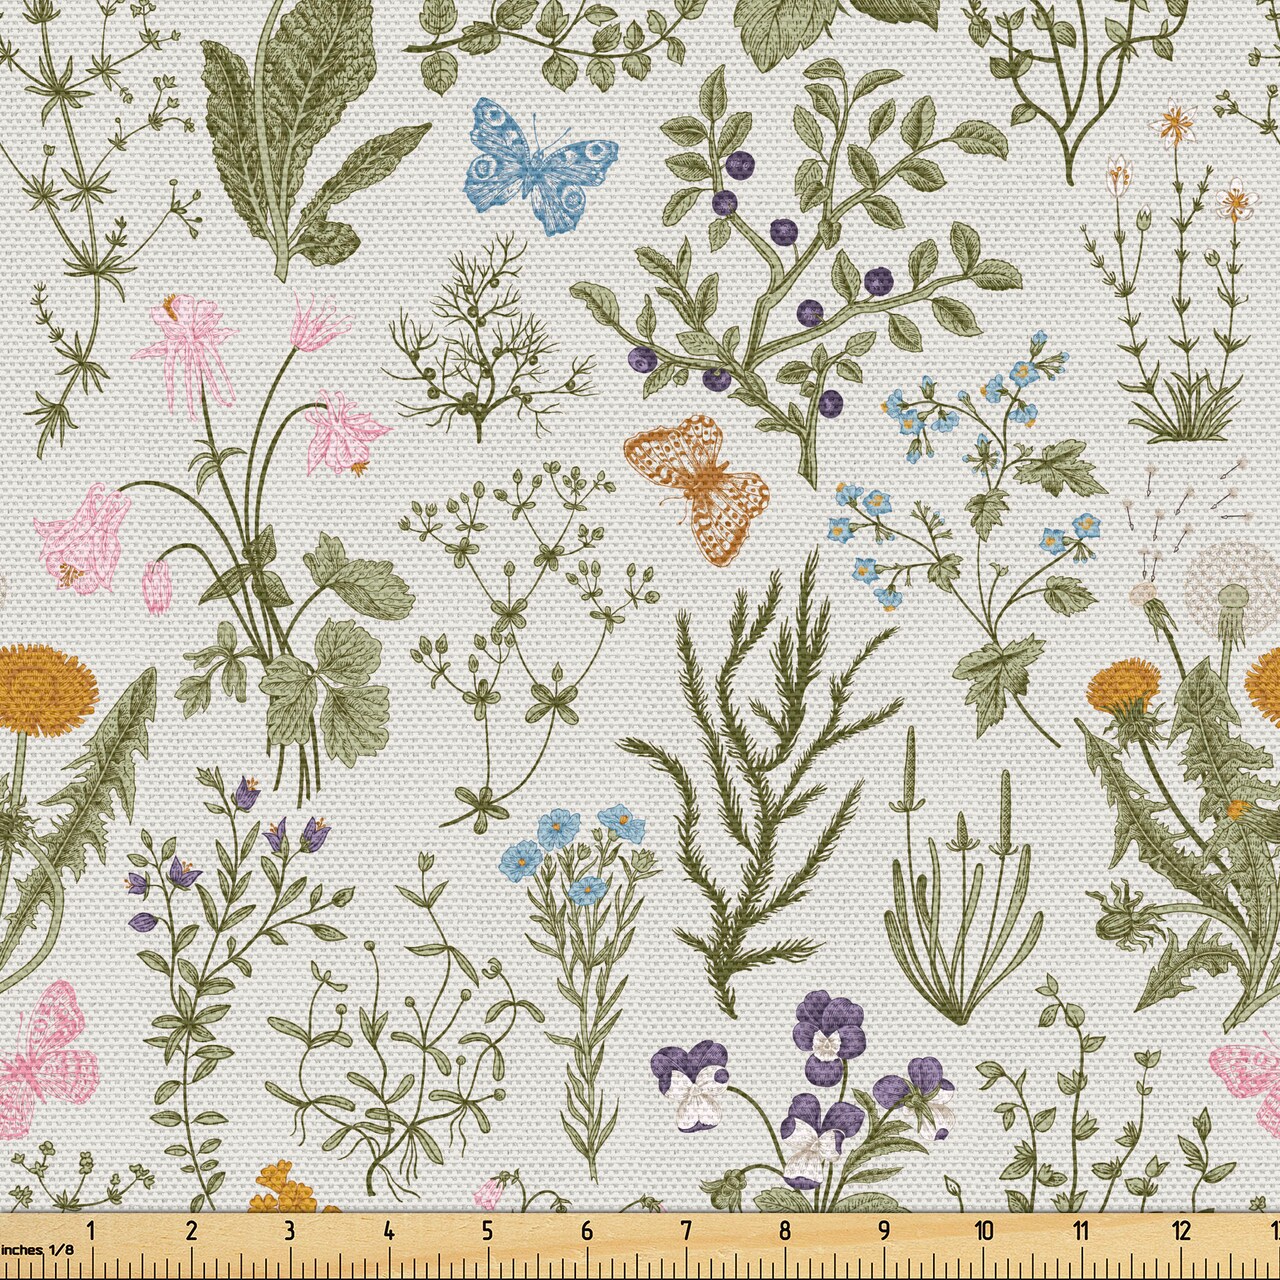 Ambesonne Floral Fabric by the Yard, Vintage Garden Plants Herbs Flowers Botanical Classic Design Art, Decorative Fabric for Upholstery and Home Accents, Reseda Green Beige